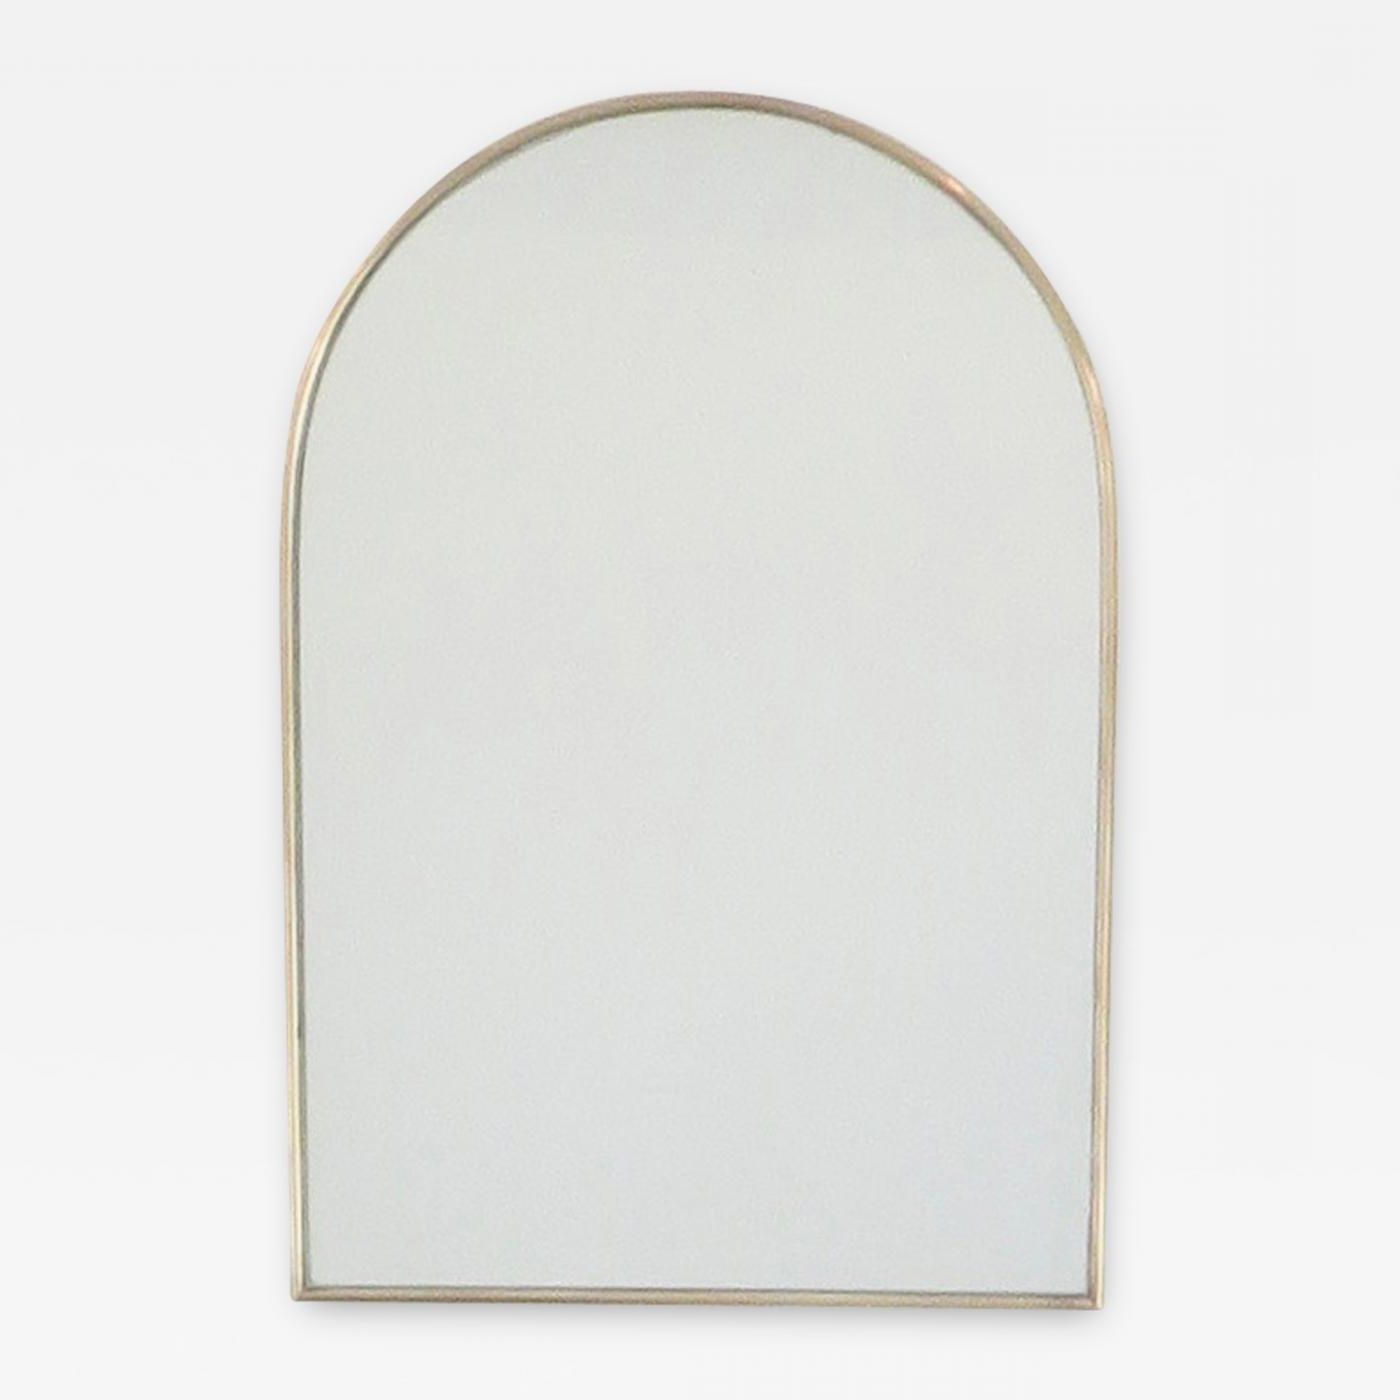 Bronze Arch Top Wall Mirrors With Preferred Italian Brass Framed Wall Mirror Arch Top (View 12 of 15)